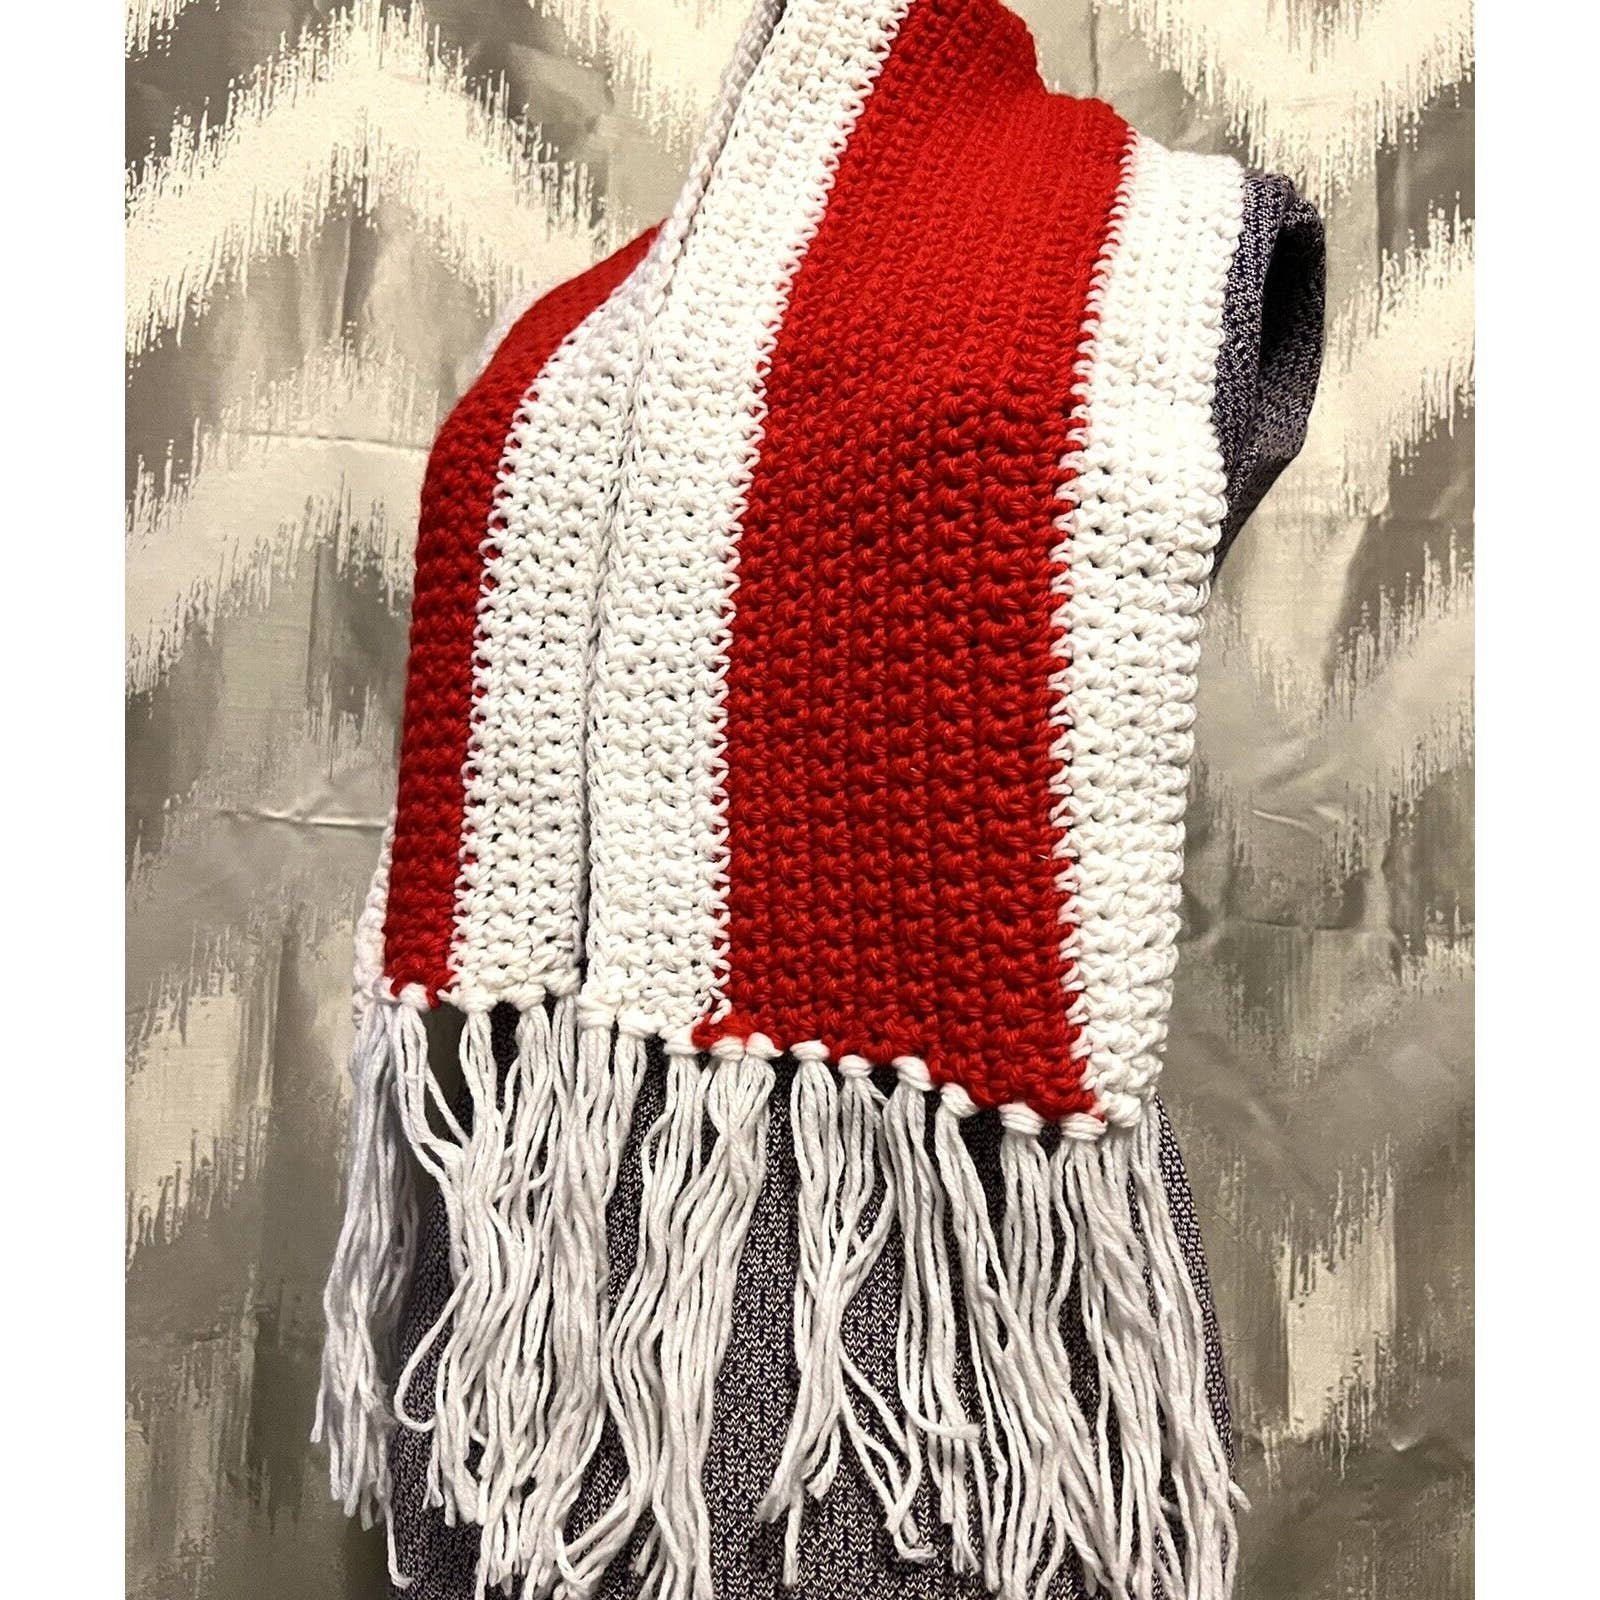 Handmade Crochet Knitted Red and White Striped Scarf With Fringe 58” eO0okUhaR